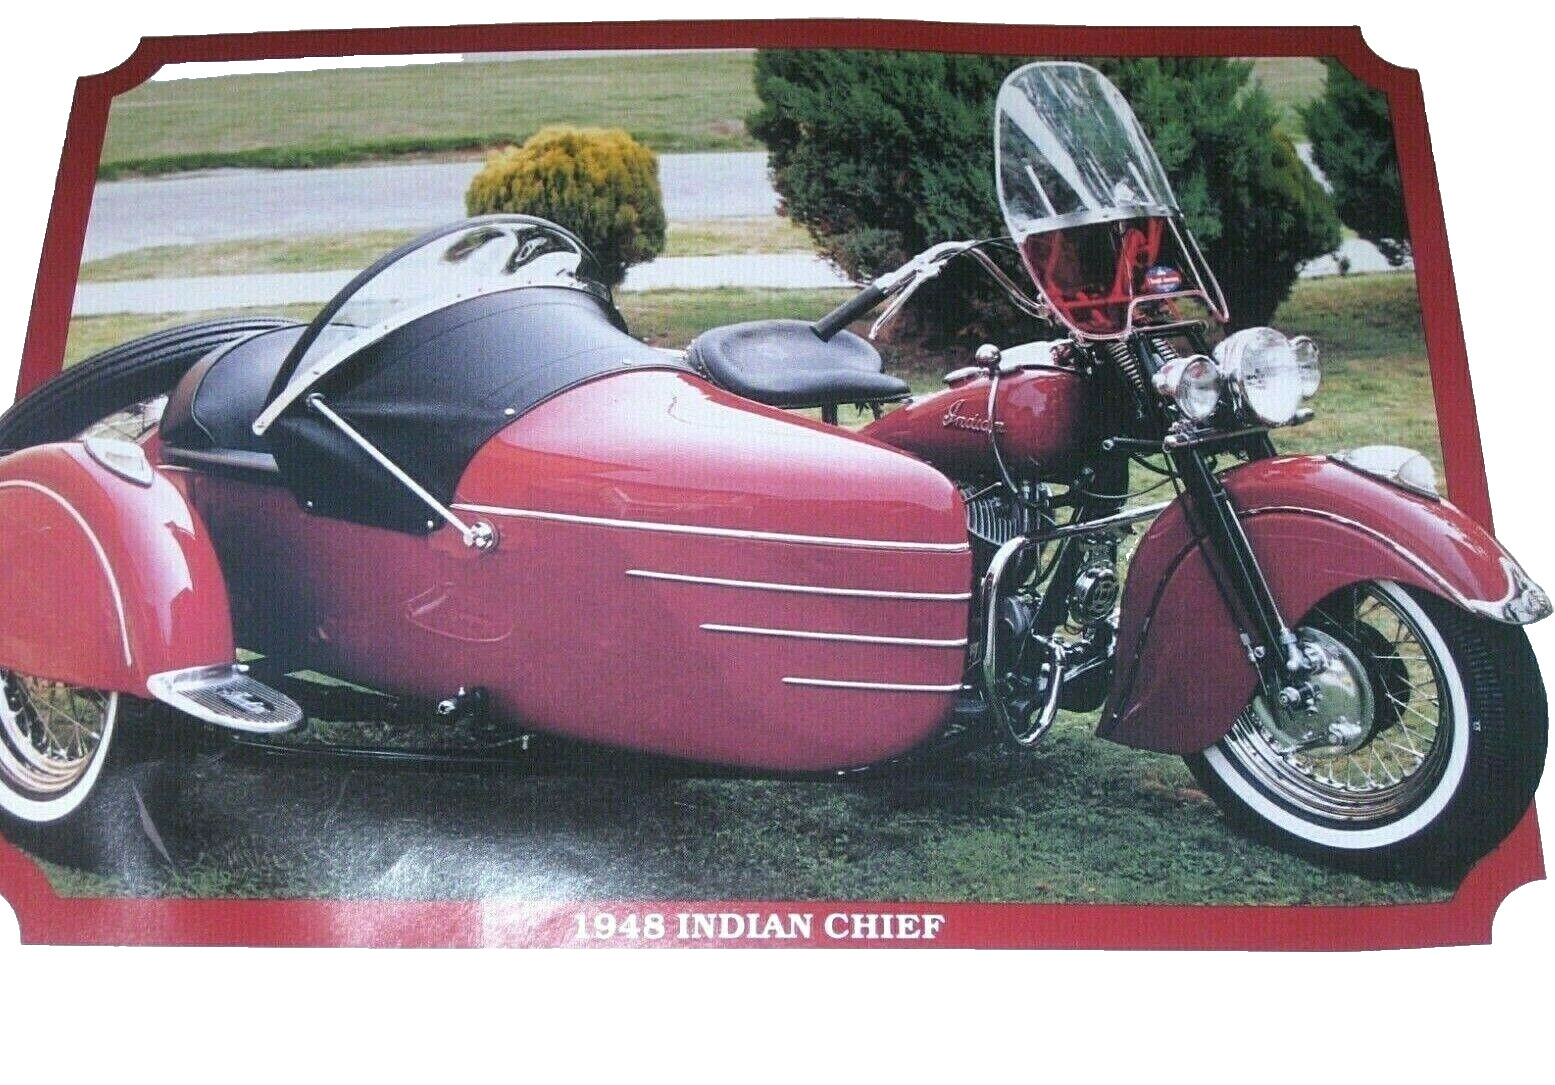 Vintage Antique Classic Motorcycle Calendar Harley Davidson Indian Chief 1987-88